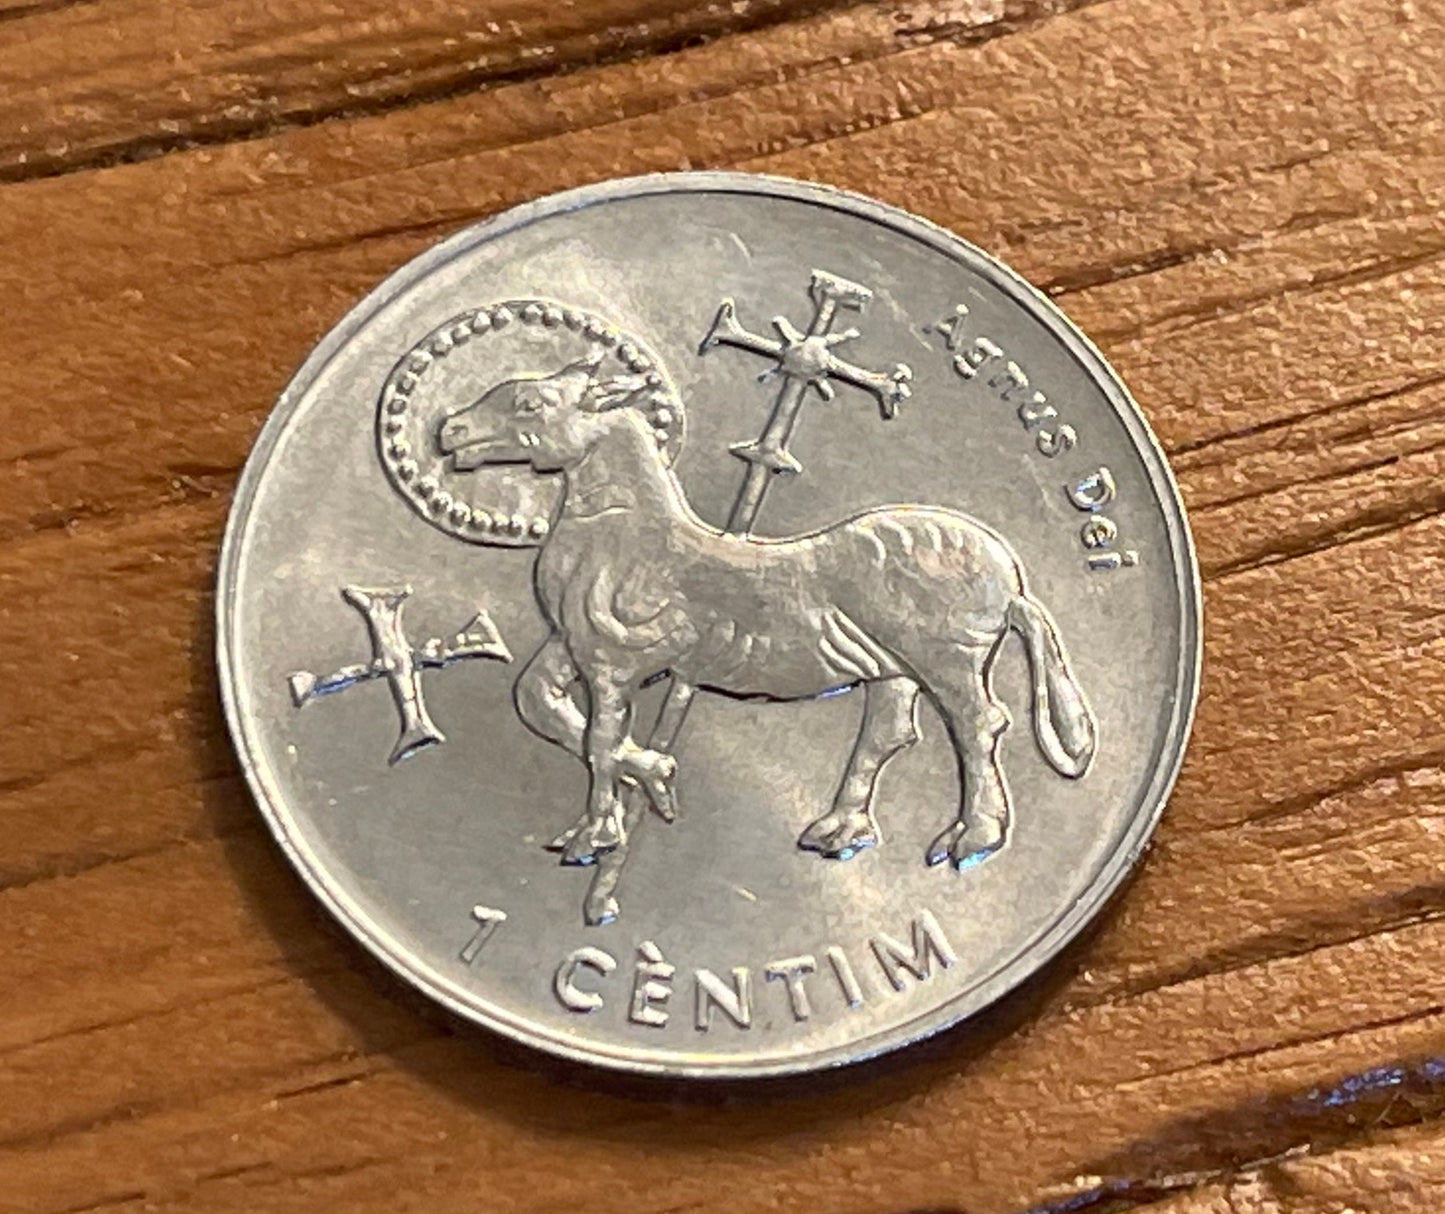 Agnus Dei Lamb of God Andorra 1 Centim Authentic Coin Money for Jewelry and Craft Making 2002